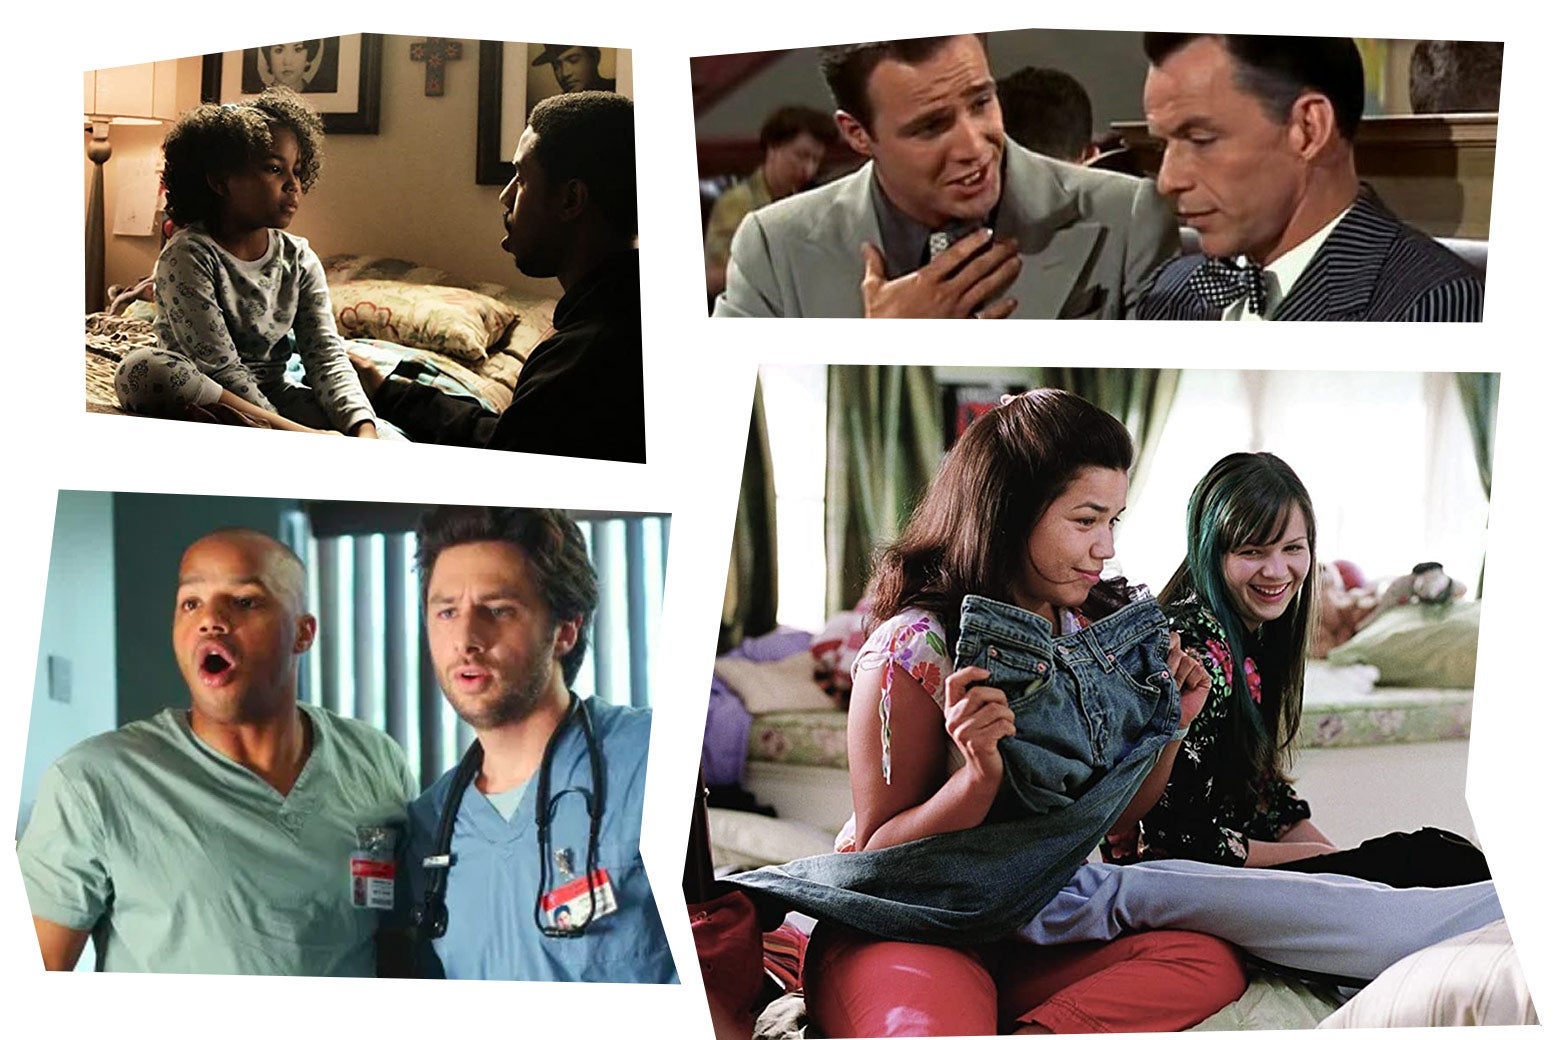 Stills from each of the movies in a mosaic art style: Michael B. Jordan kneels next to Ariana Neal who is sitting on a bed; Marlon Brando and Frank Sinatra; Zach Braff and Donald Faison look open-mouthed at something off camera; America Ferrara sits on a bed, holding up a pair of jeans, Amber Tamblyn sitting behind her.